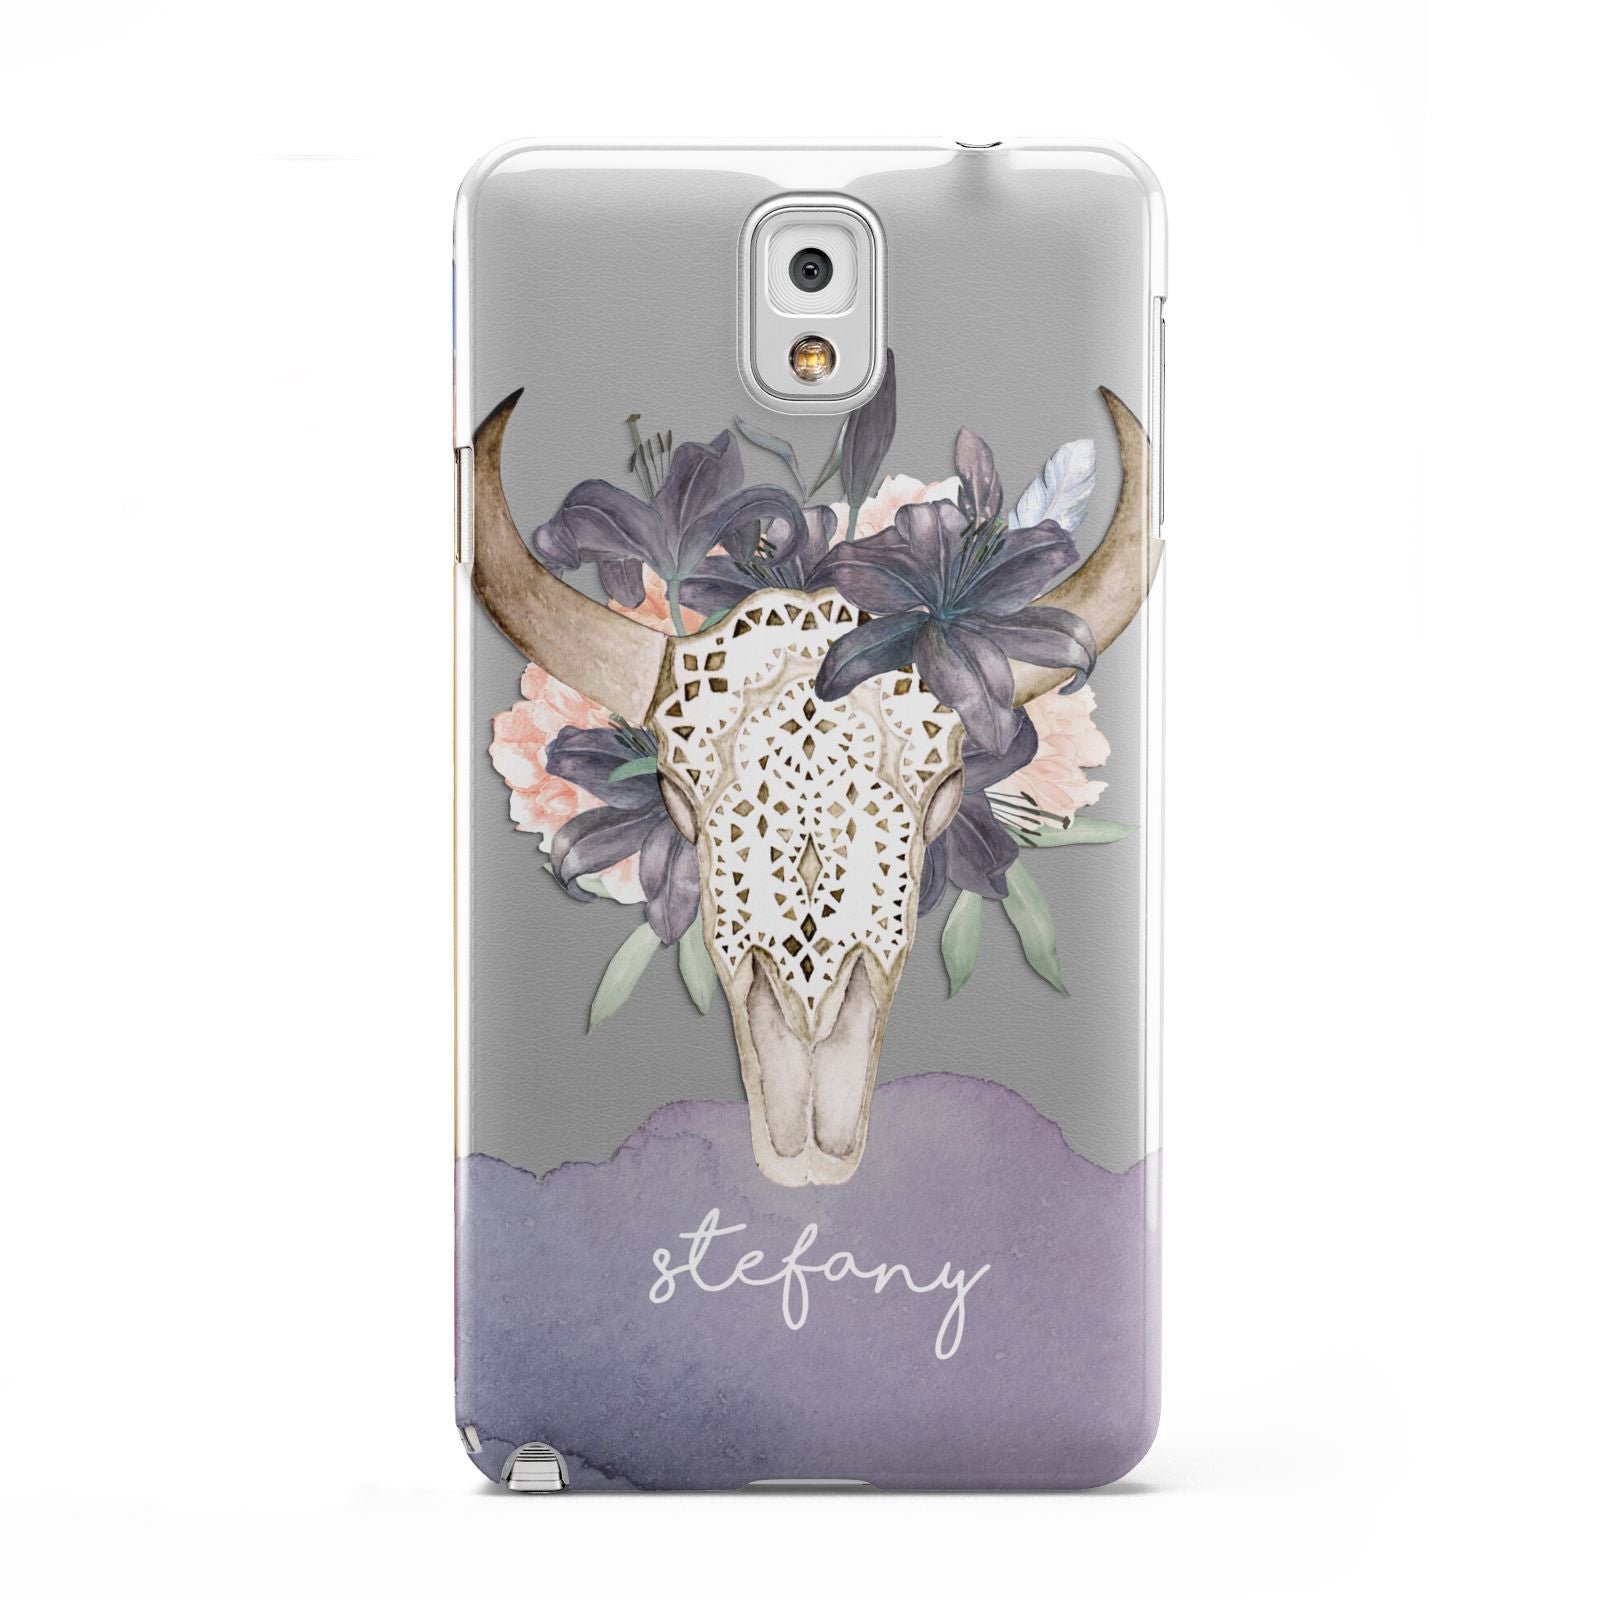 Personalised Bull s Head Samsung Galaxy Note 3 Case